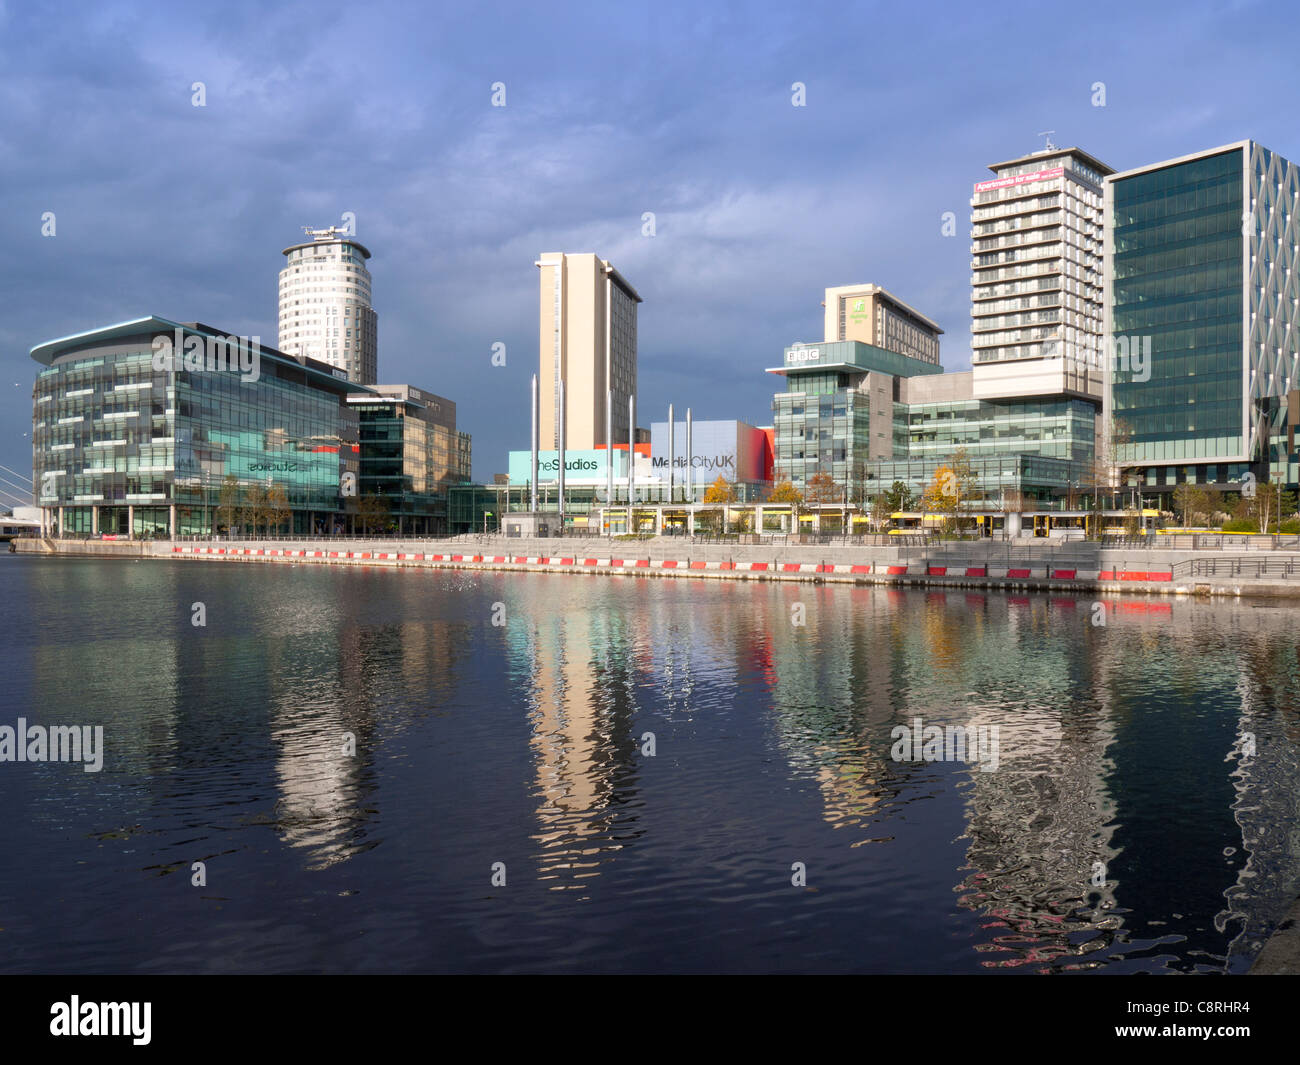 MediaCity, Salford Quays, Manchester across water, with tram Stock Photo